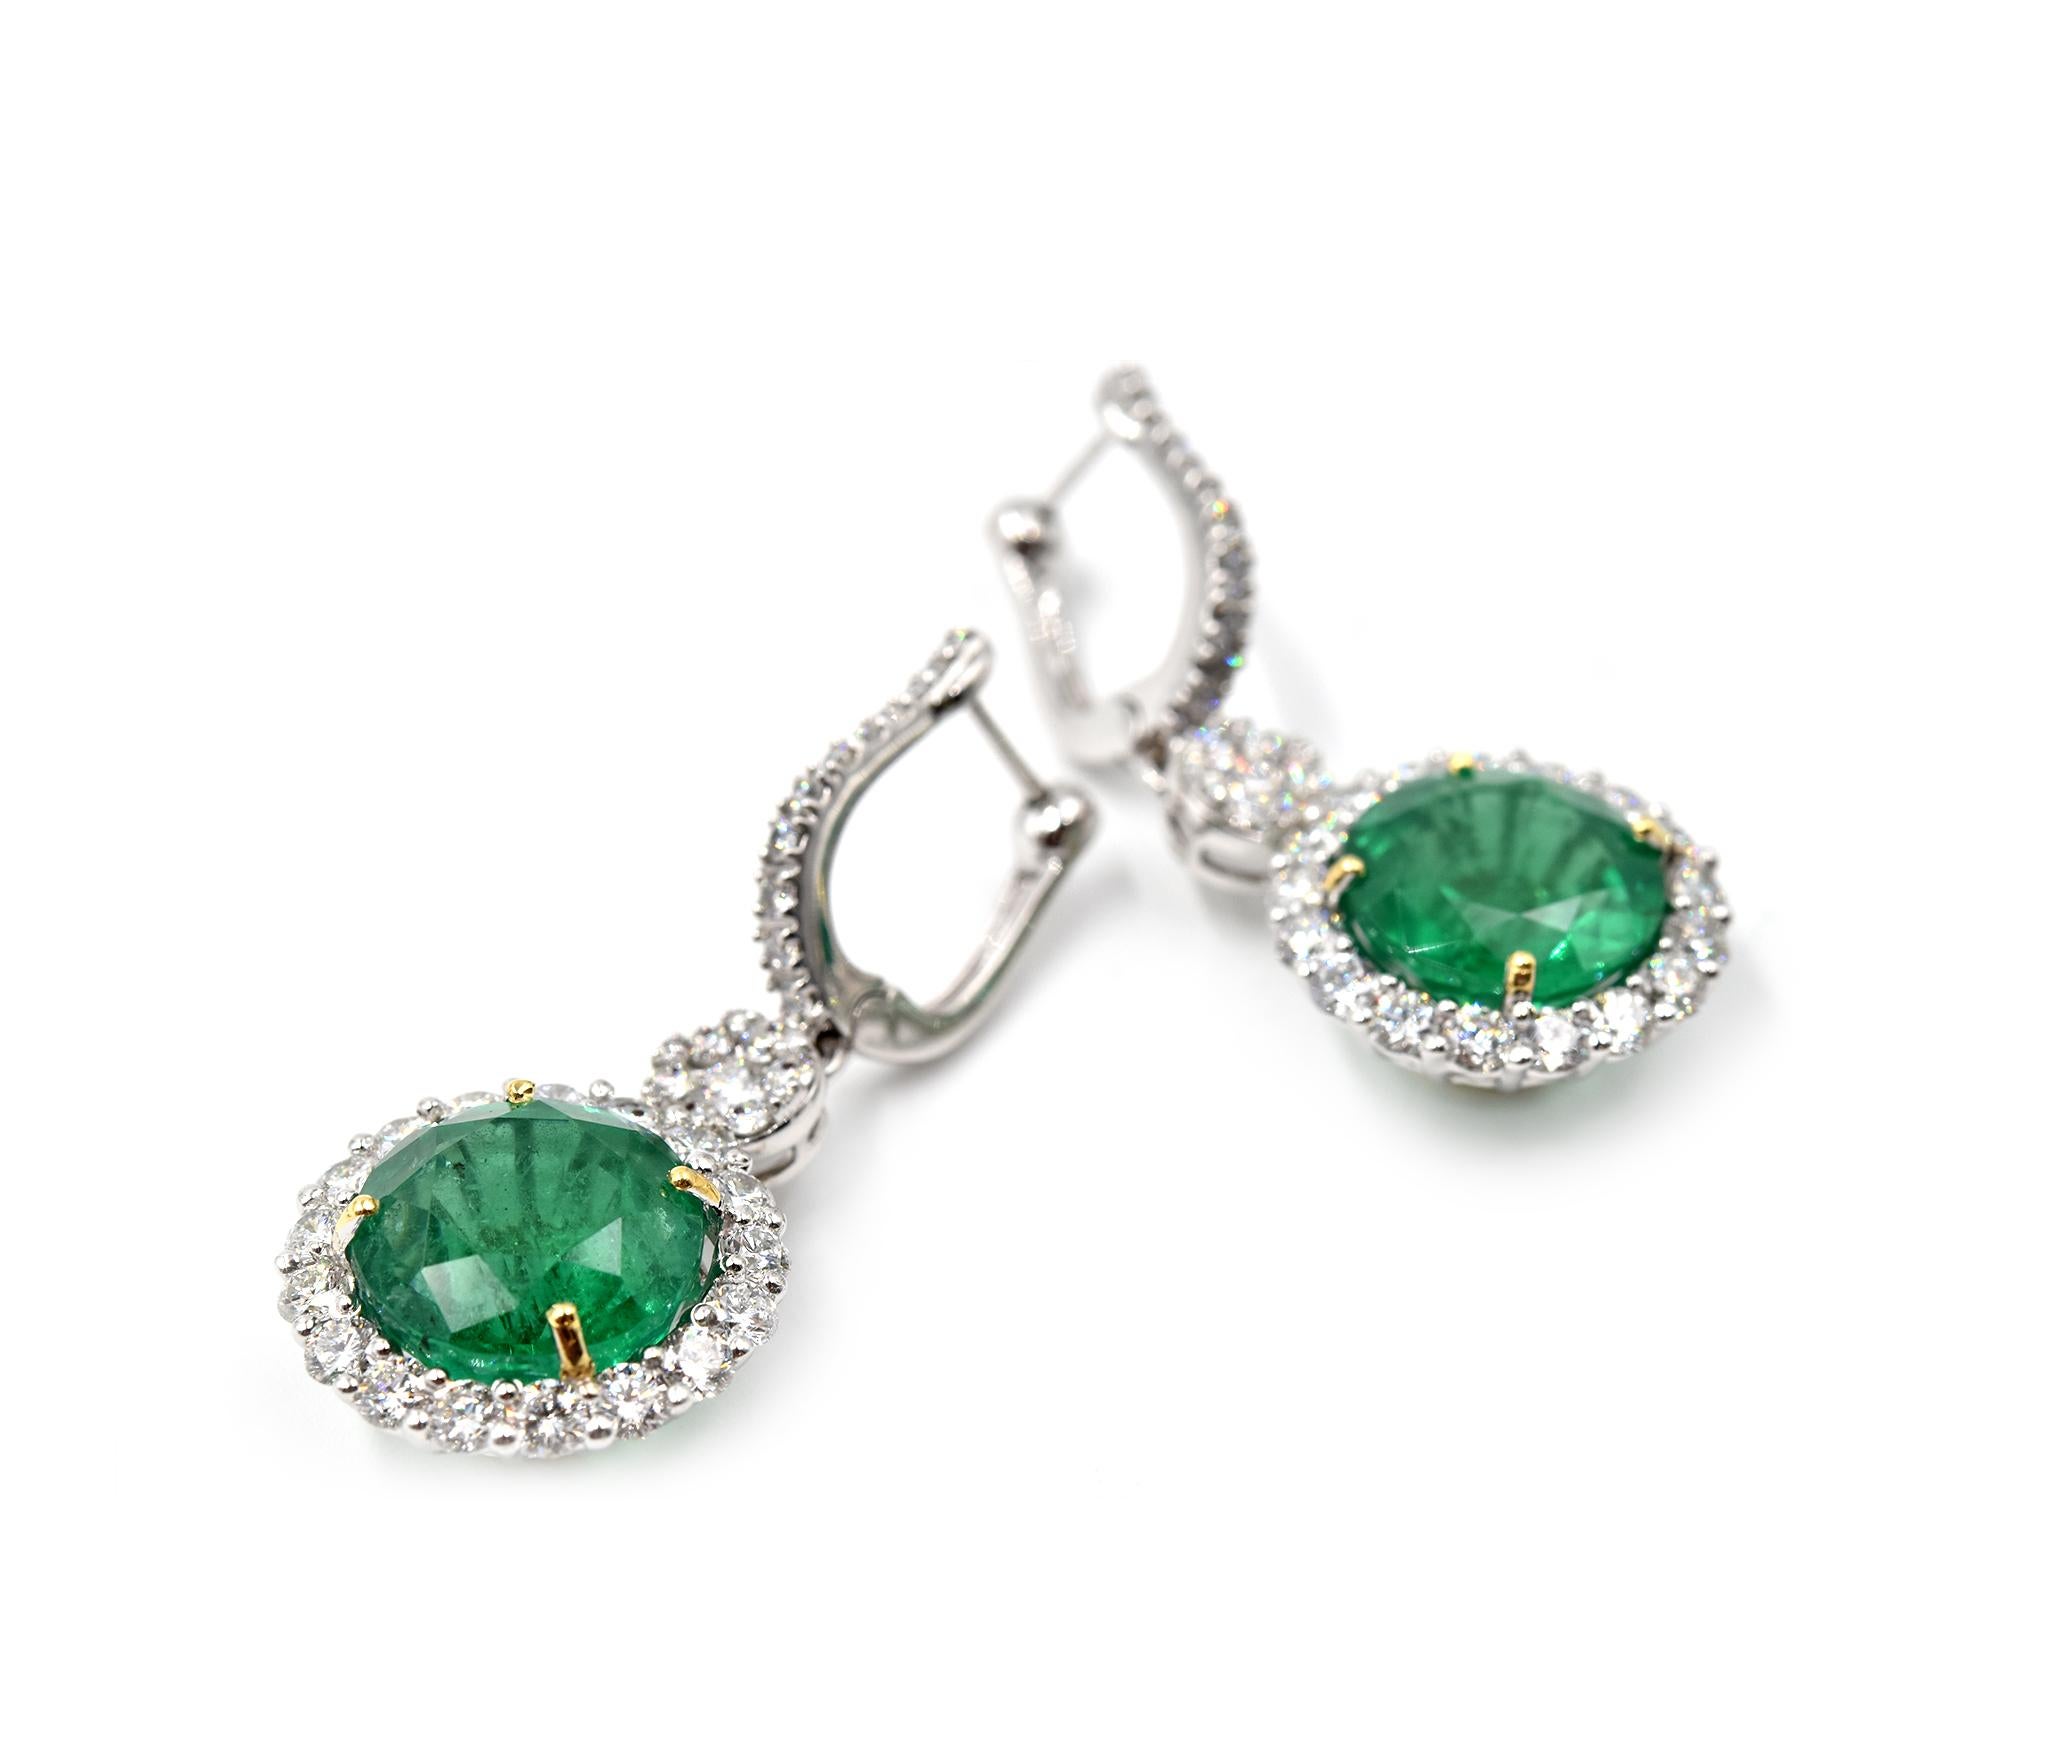 Designer: custom design
Material: 18k white gold
Emeralds: 13.92 carats round brilliant cut = two emeralds
Diamonds: 82 round brilliant cut = 3.38 carat total weight
Color: G
Clarity: VS 
Dimensions: each drop earring is 1 1/2-inch long and 1/2-inch